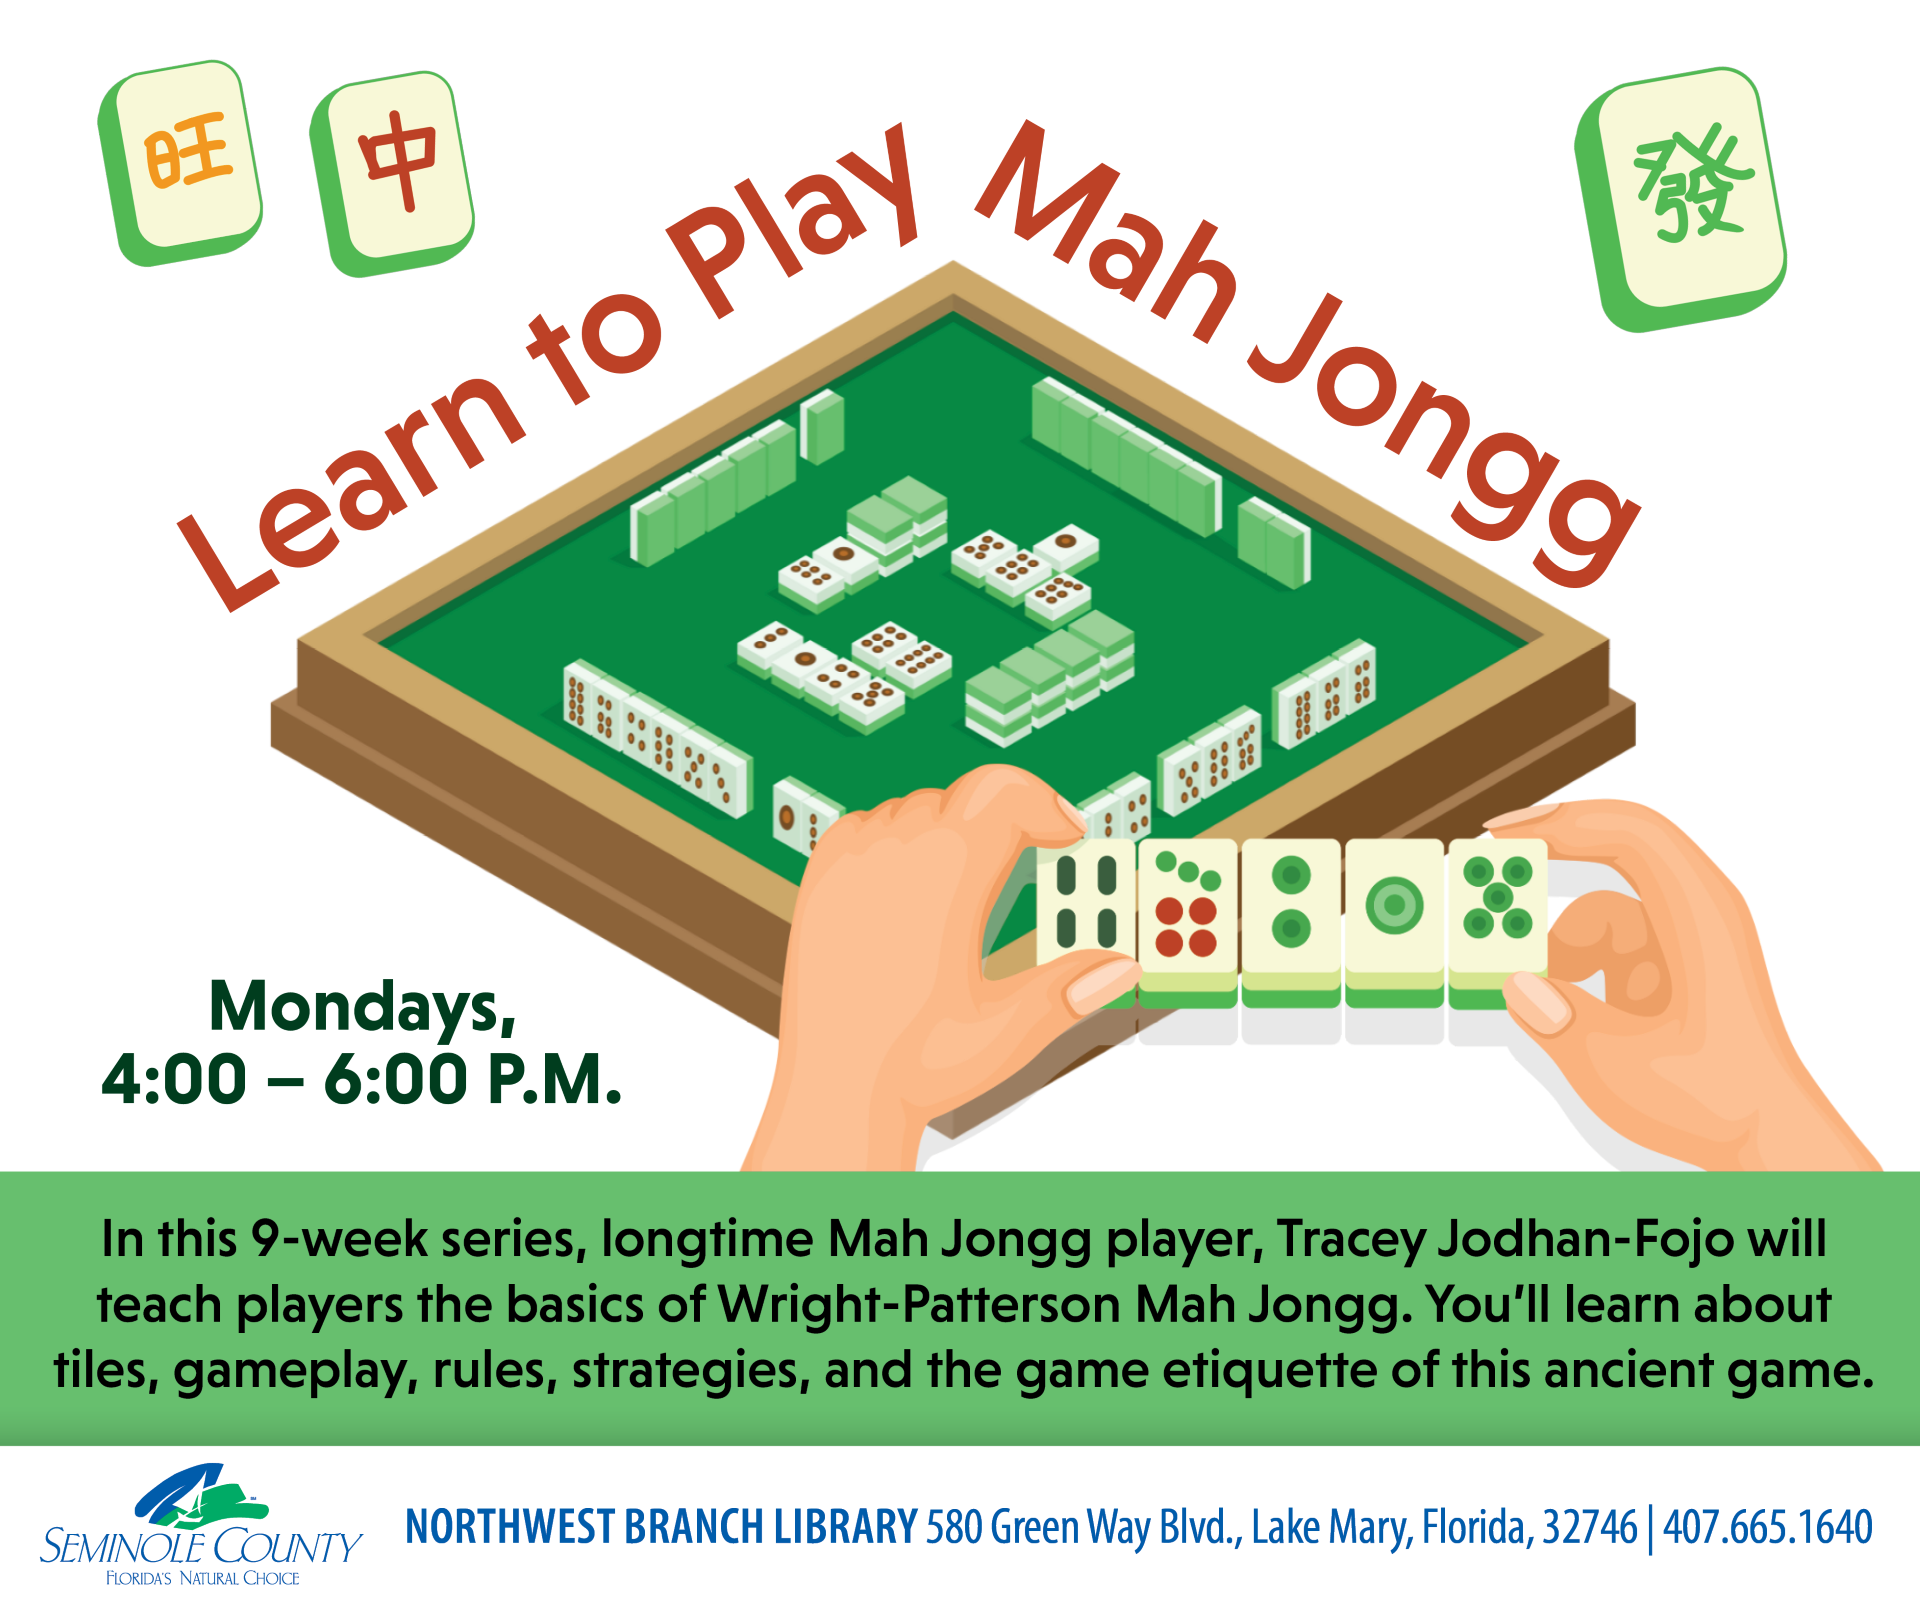 Learn to Play Mah Jongg program at Northwest Branch Library